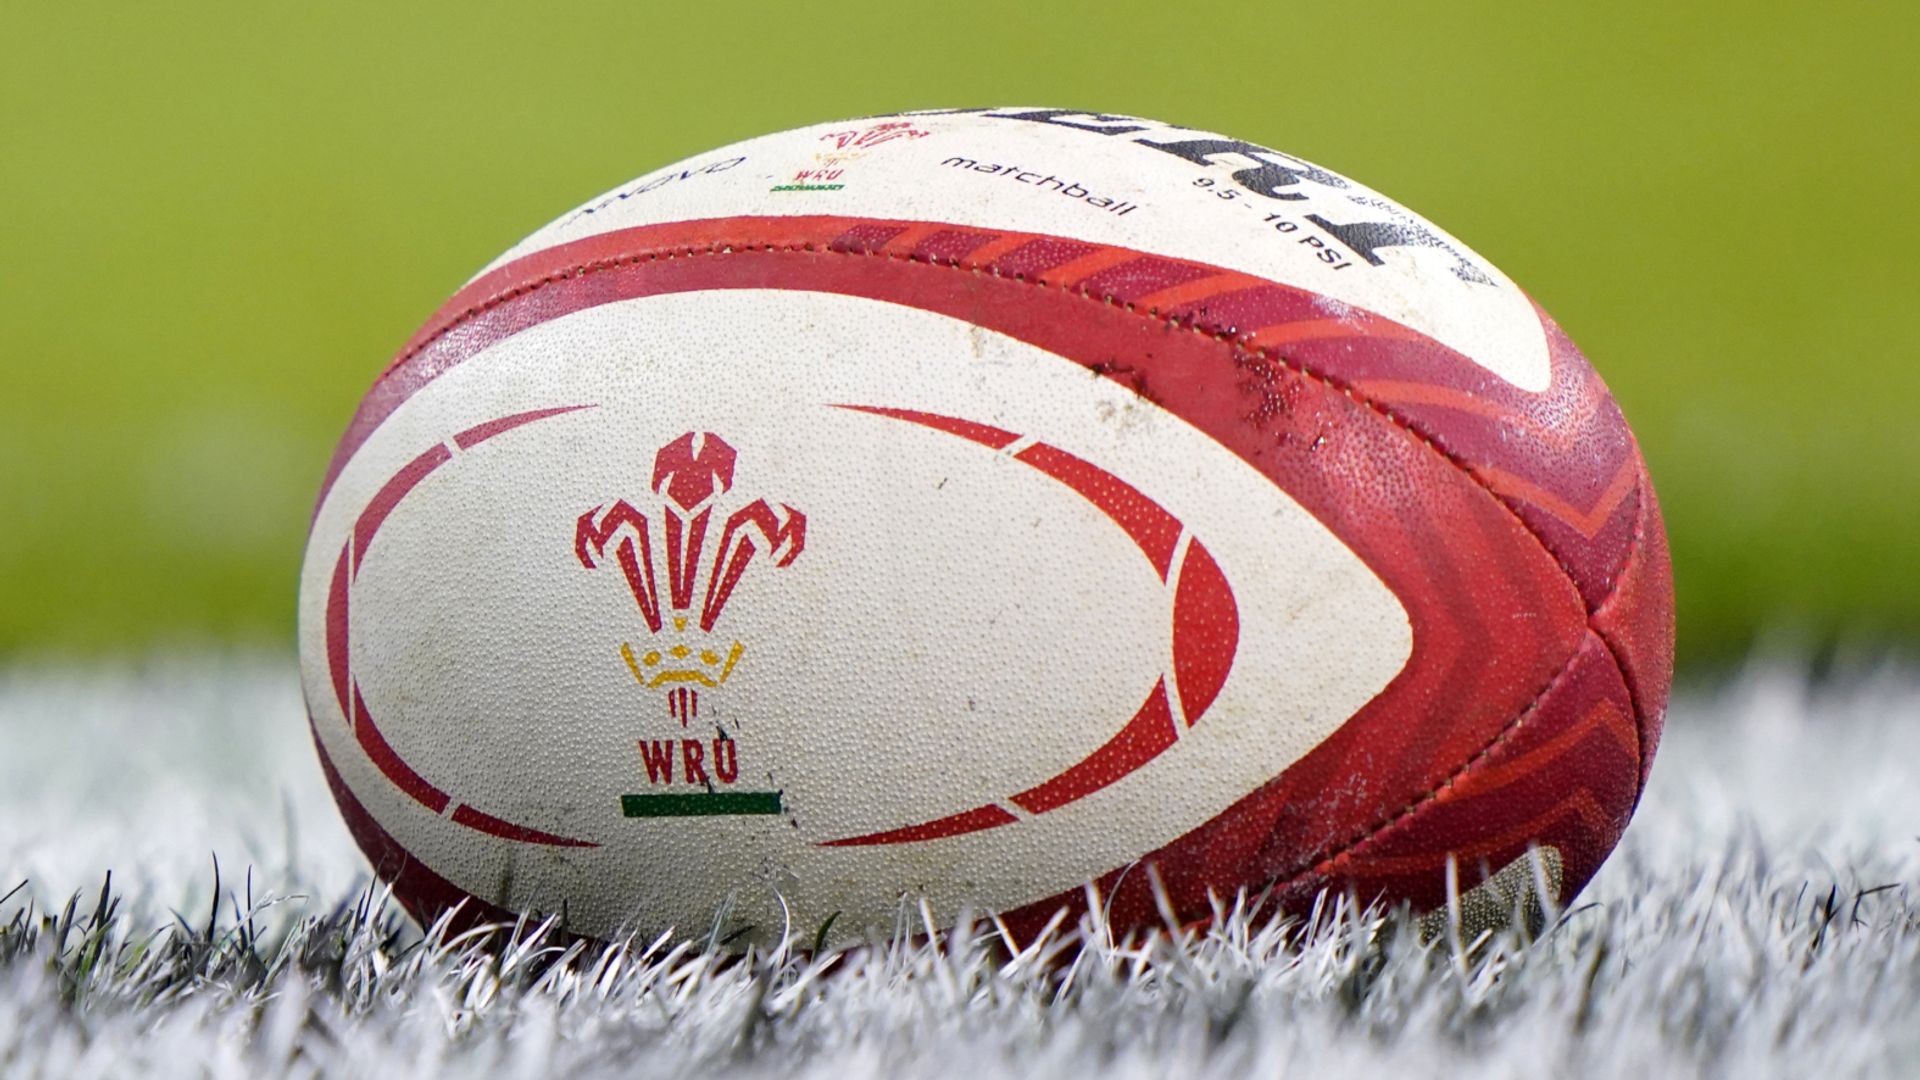 Cardiff director calls for WRU chief executive Phillips to resign